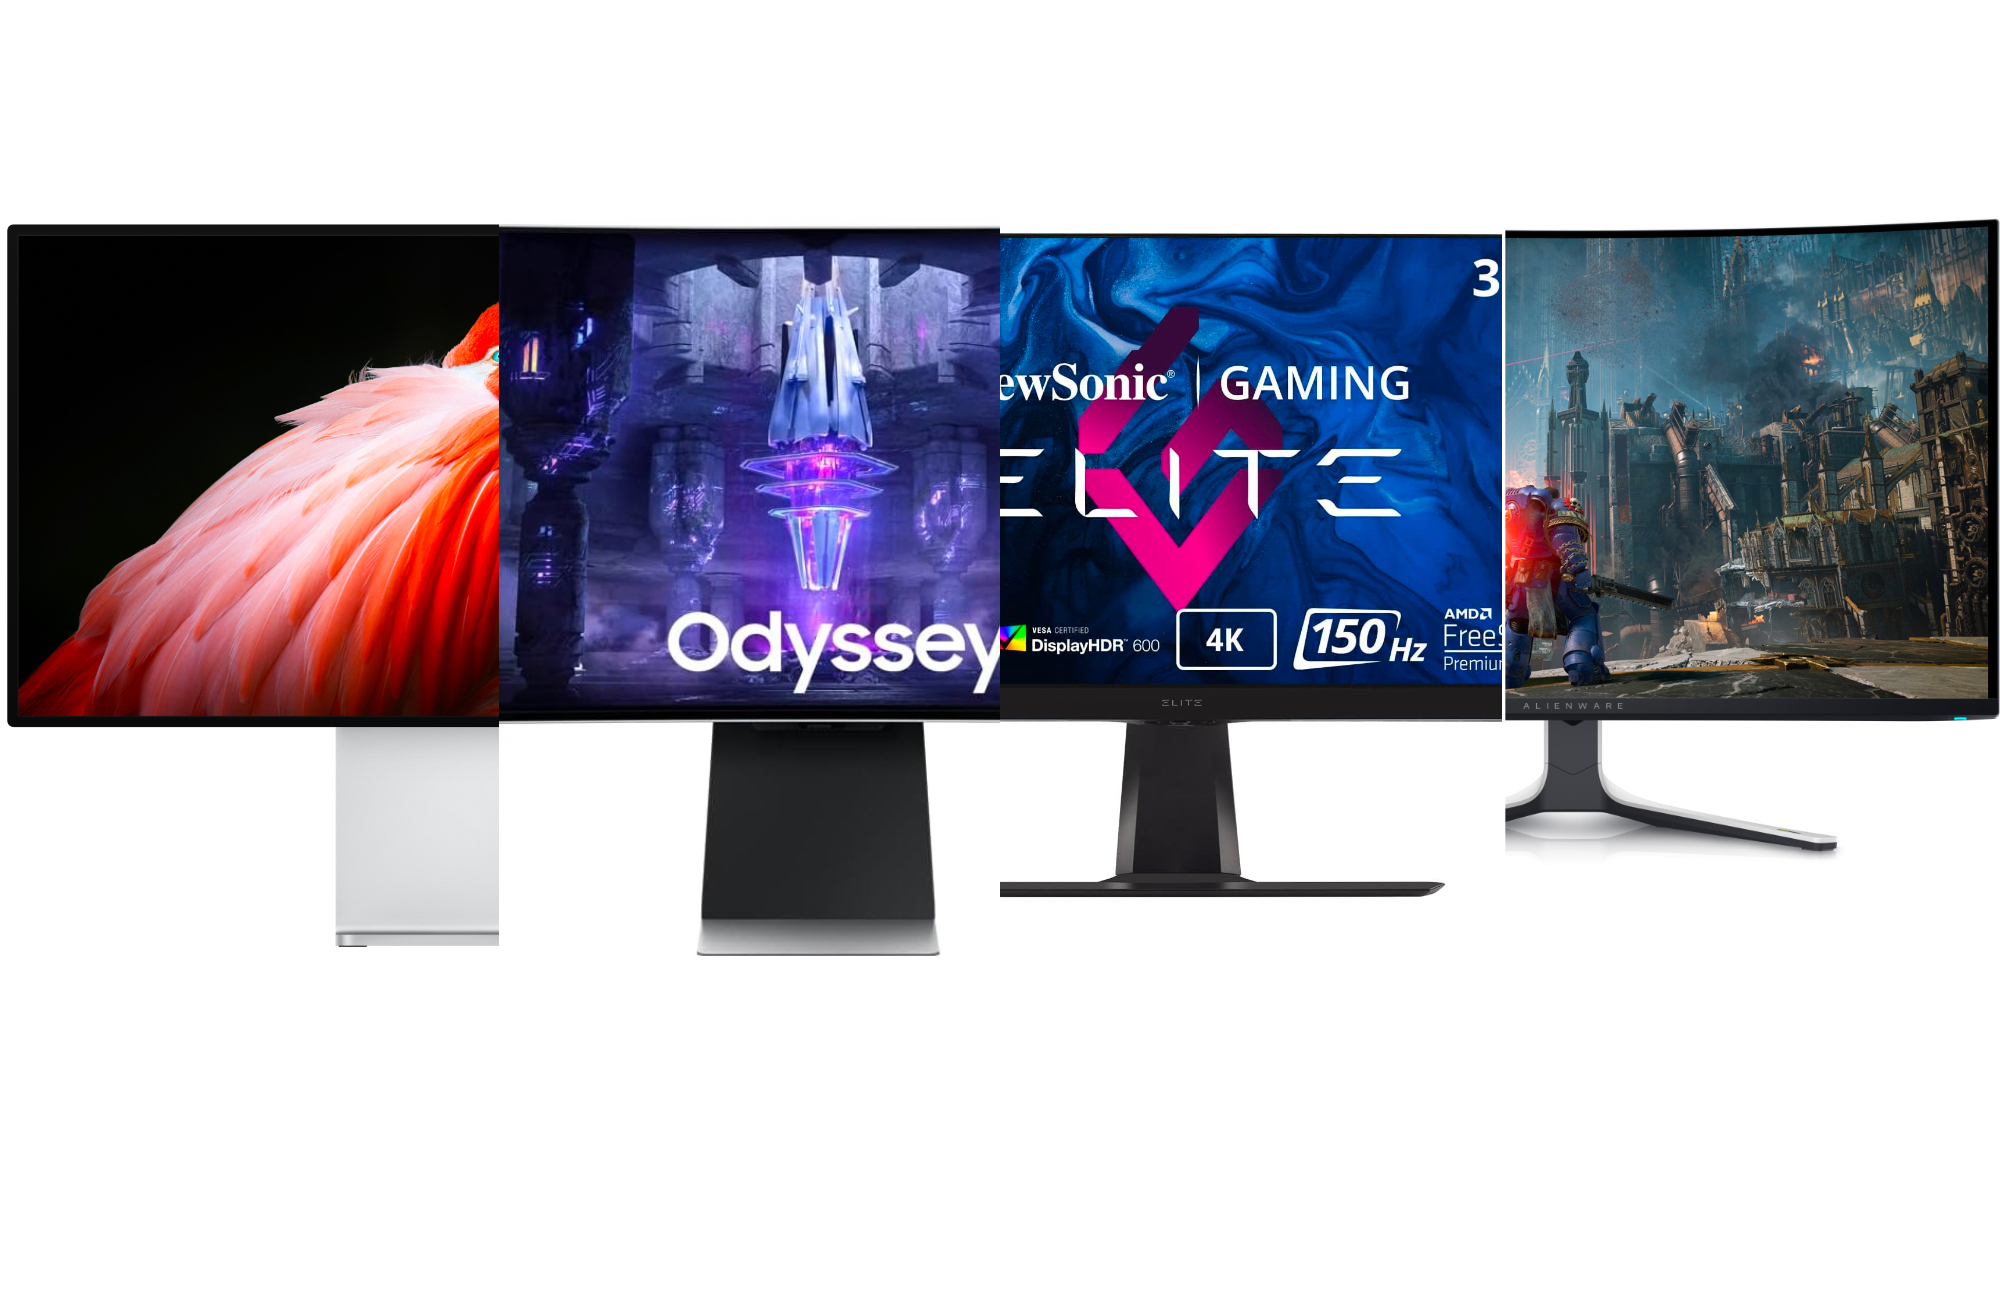 The best HDR monitors on a plain white background.